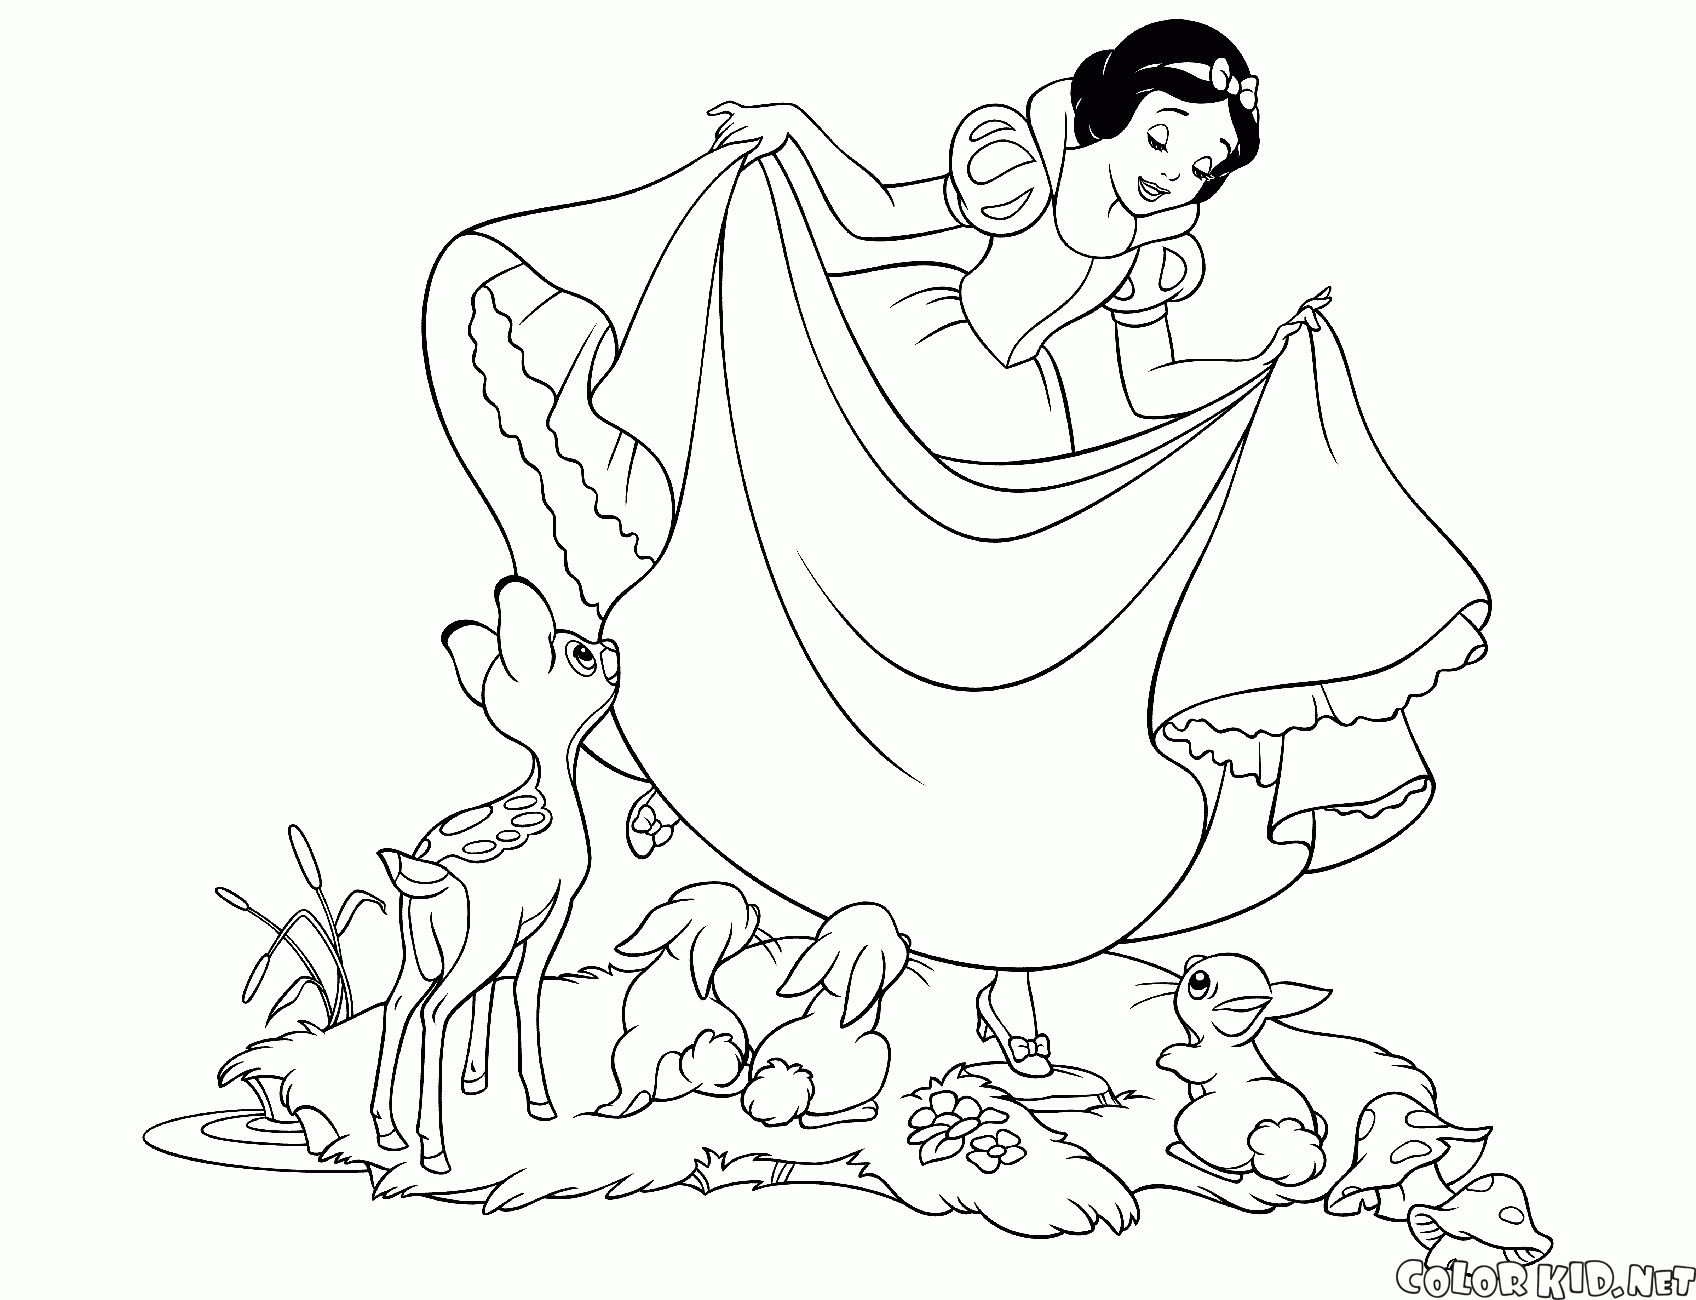 Snow White and forest animals